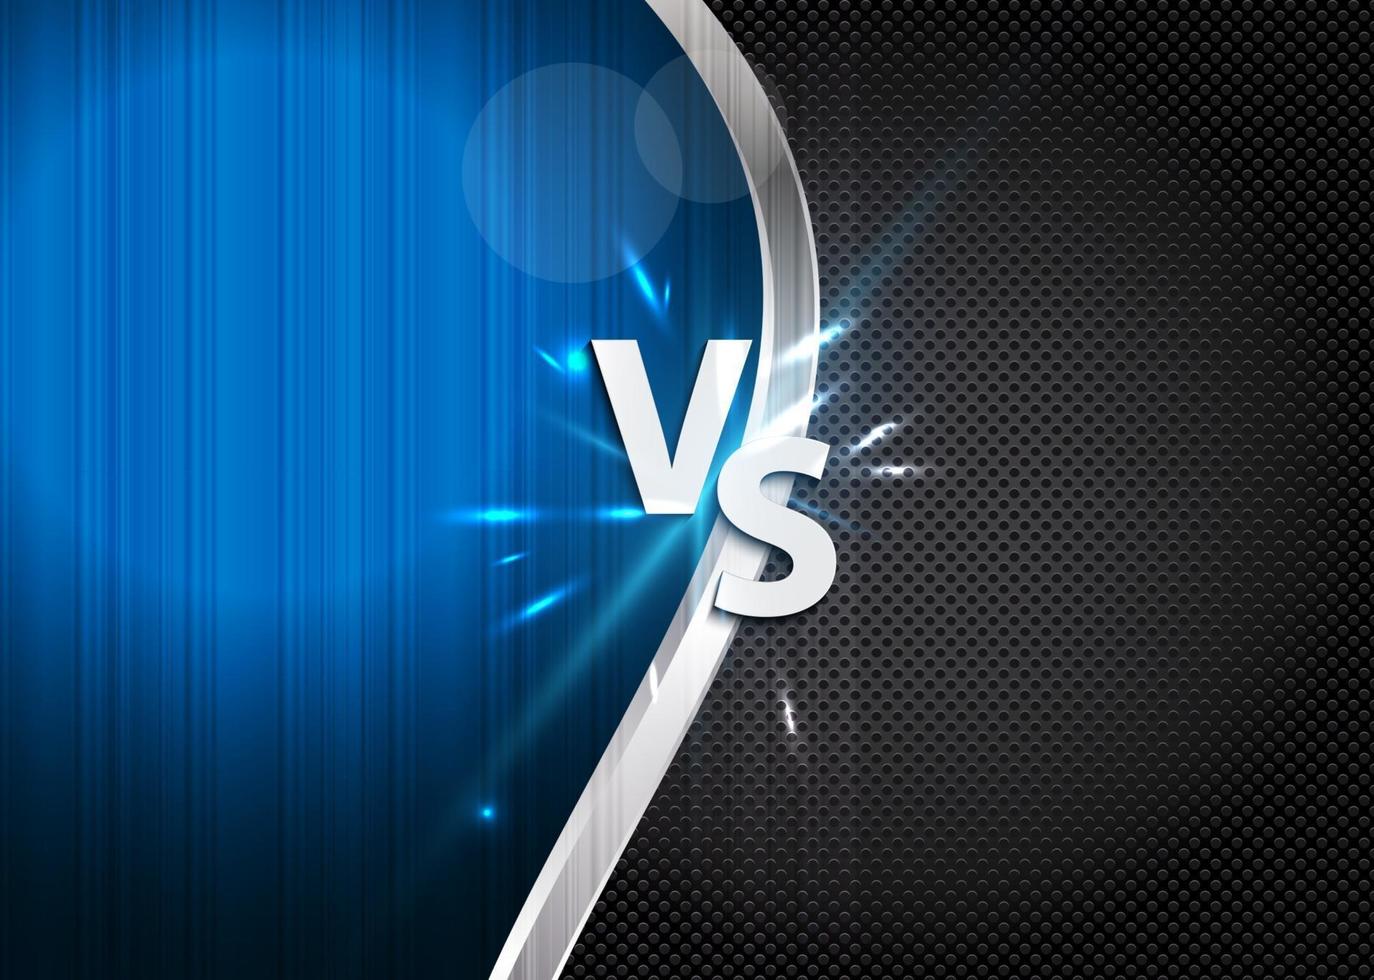 Versus letters figh background vector